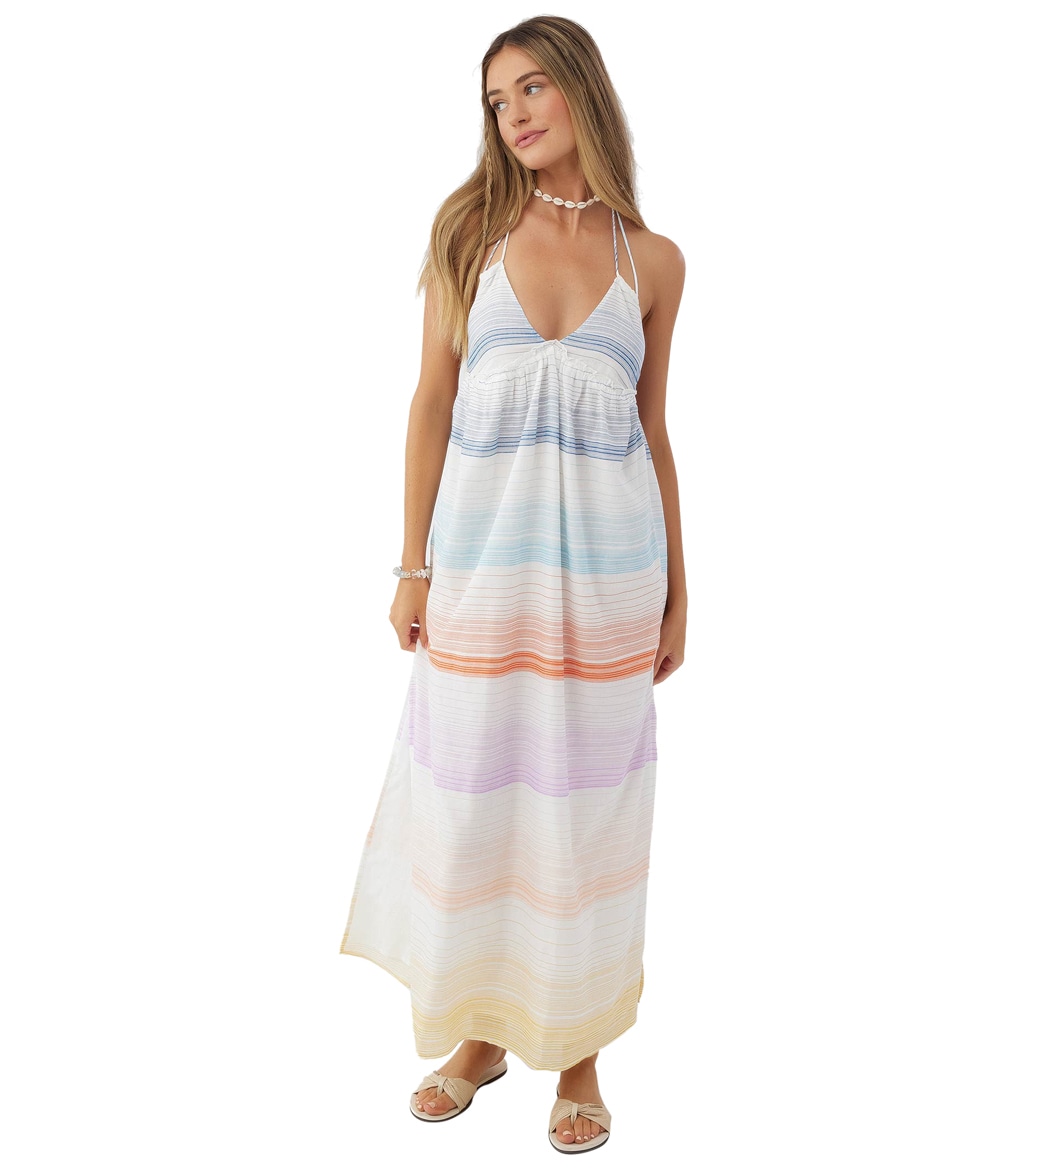 O'neill Women's Langley Dress - Multi Colored Large Cotton/Polyester - Swimoutlet.com